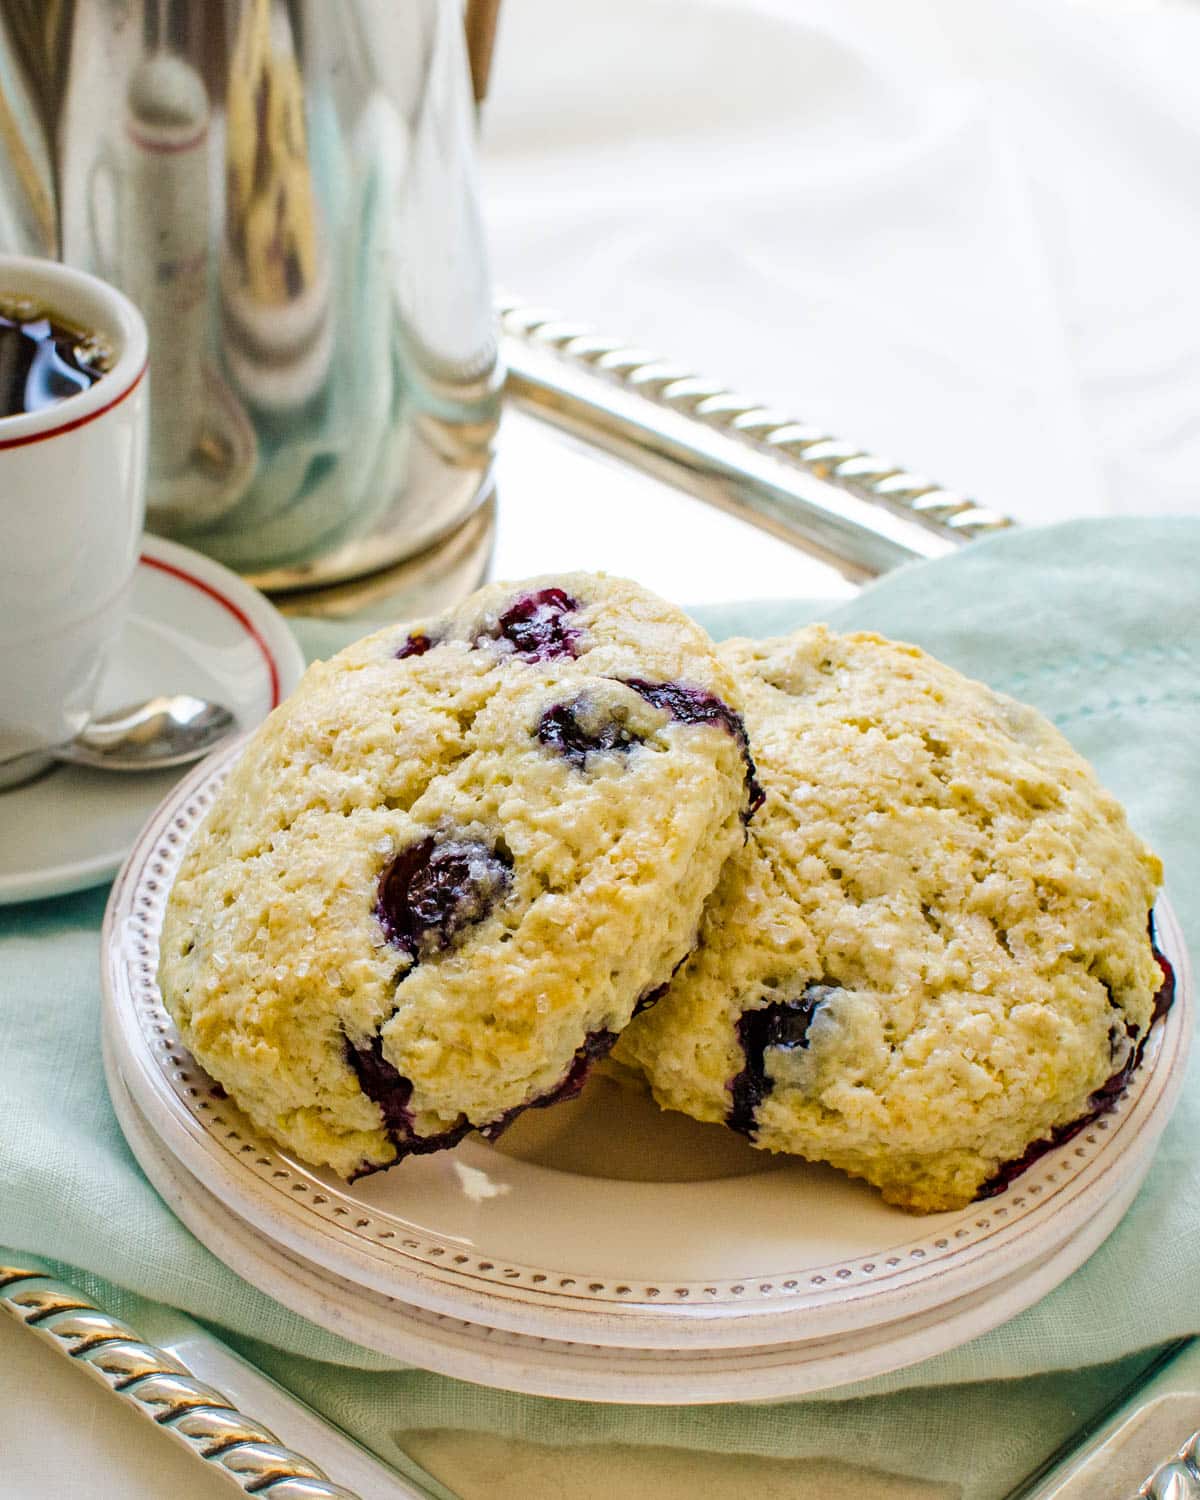 A plate of blueberry scones served for breakfast in bed.